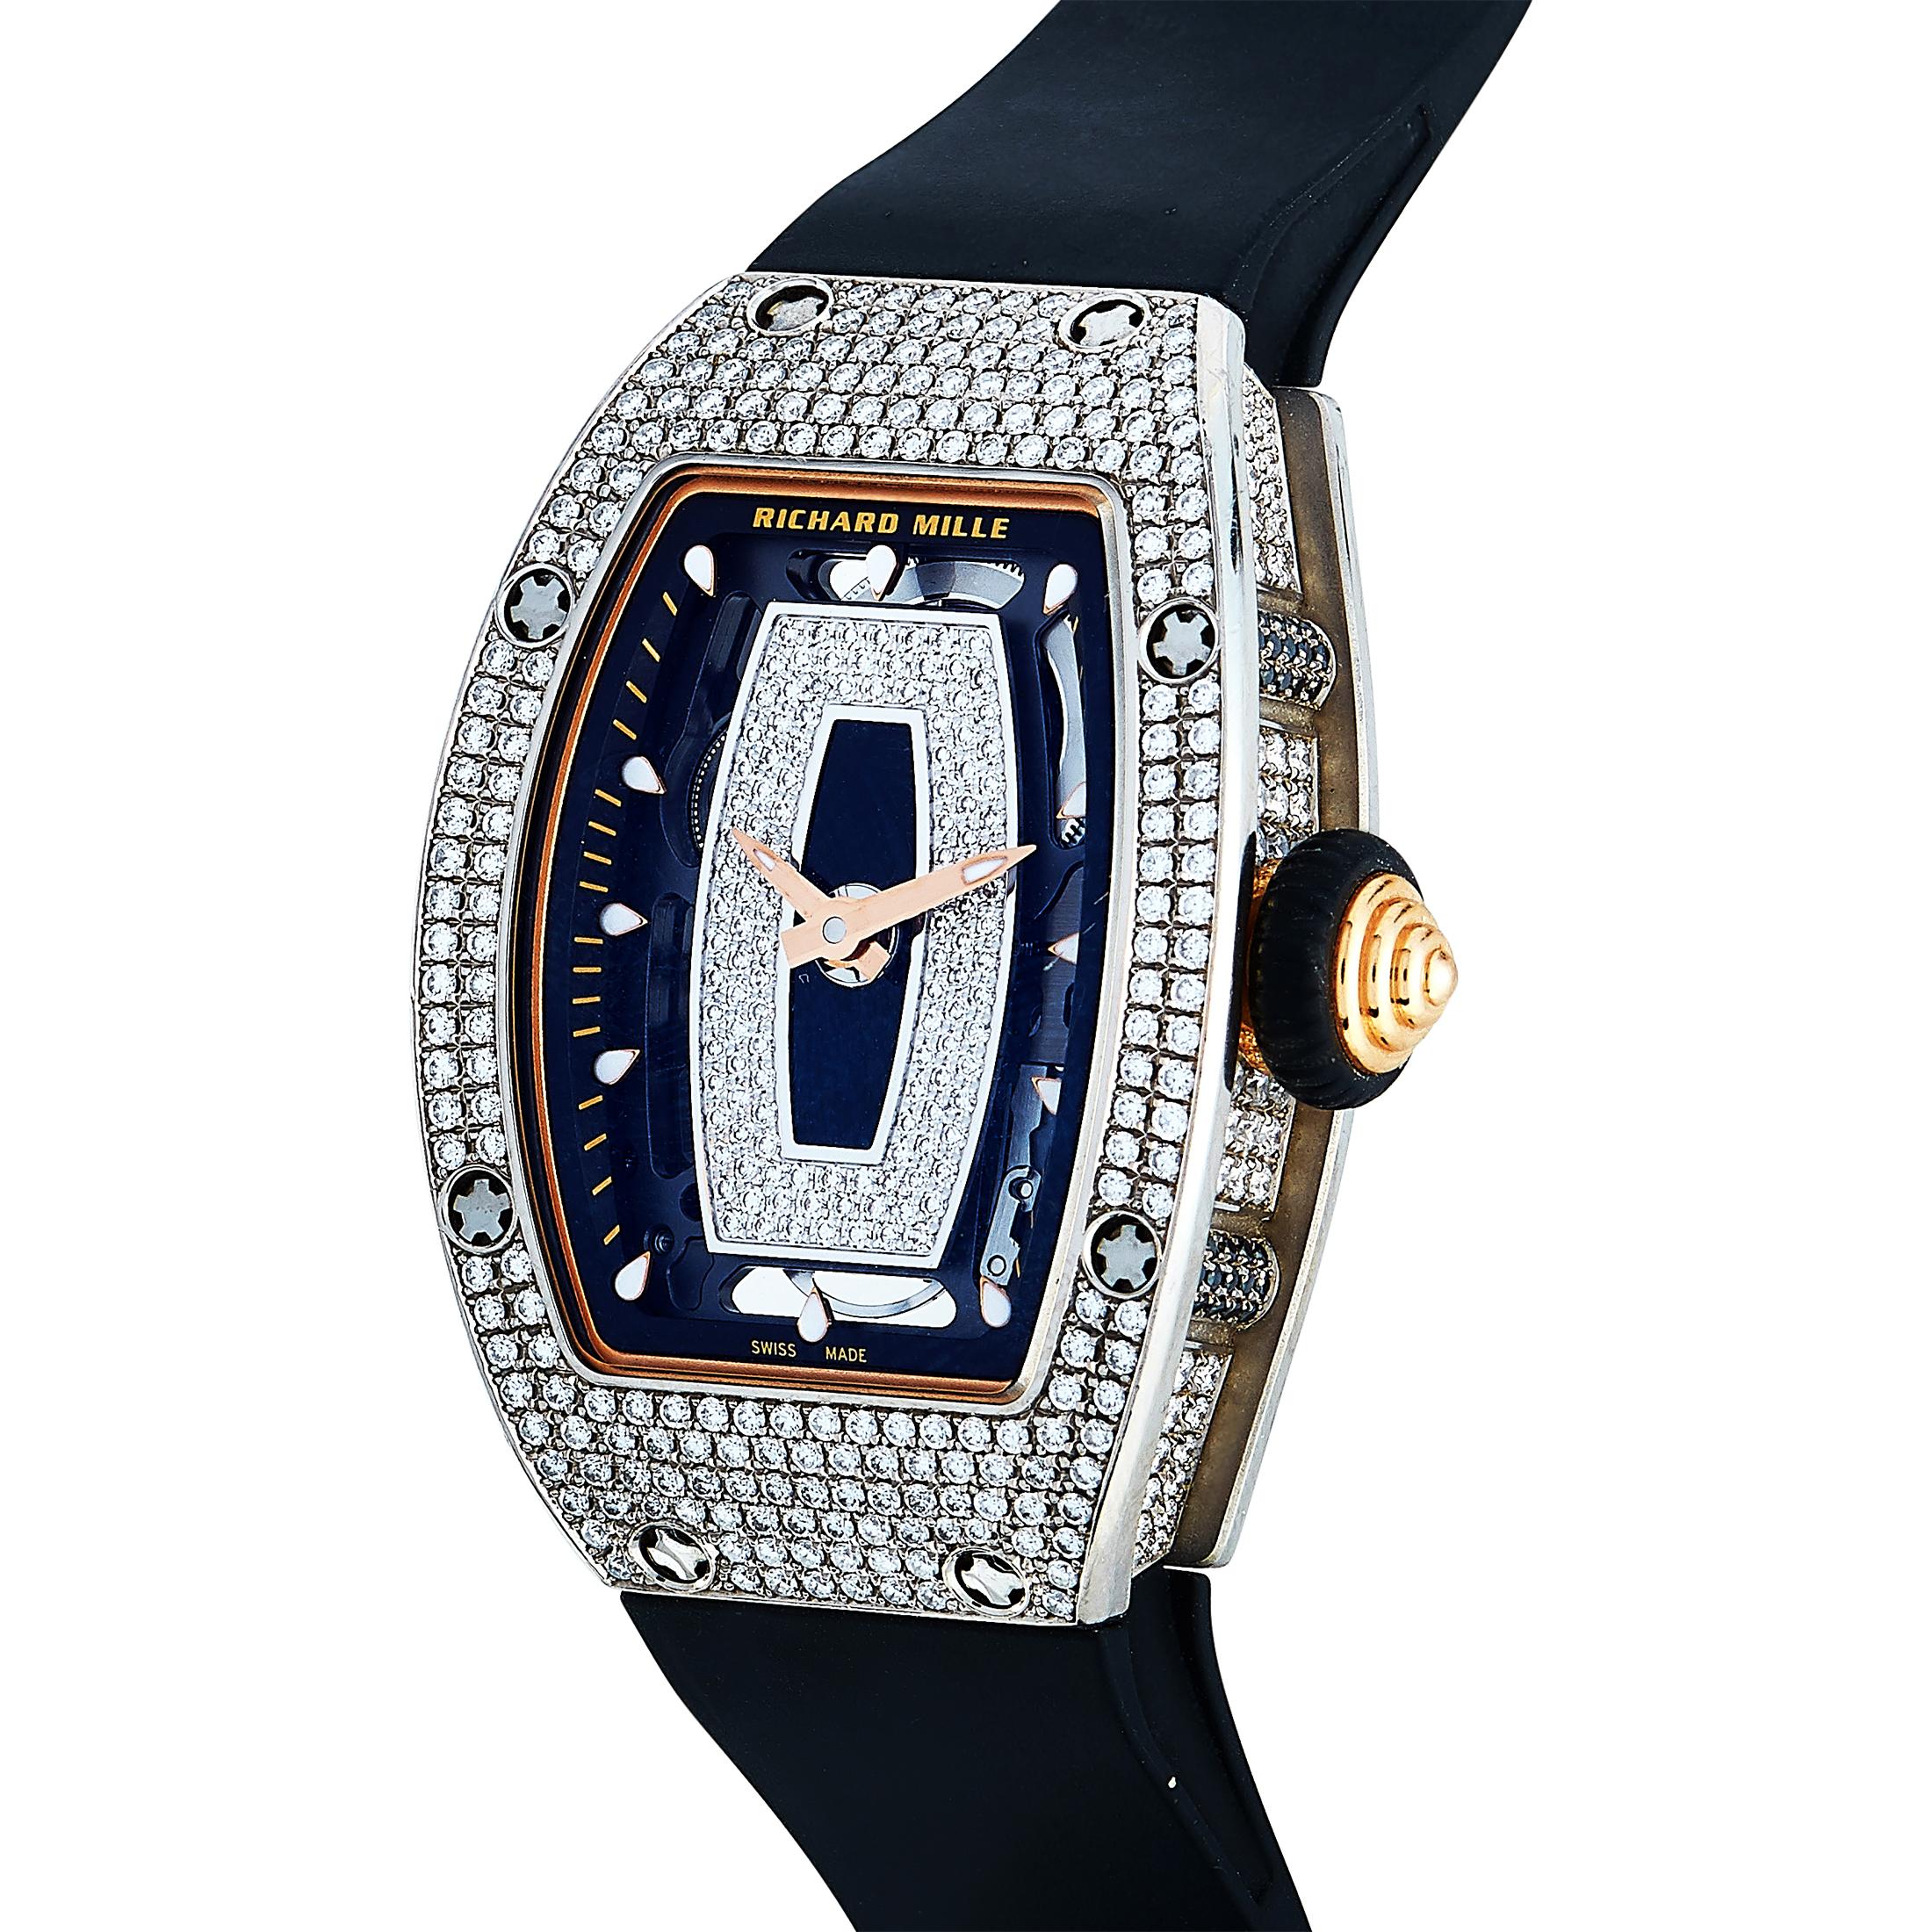 This is the Richard Mille Automatic watch, reference number RM 07-01 RG.

It is presented with a diamond-embellished 18K white gold case that boasts see-through back. The case is water-resistant to 50 meters and worn on a black rubber strap, secured